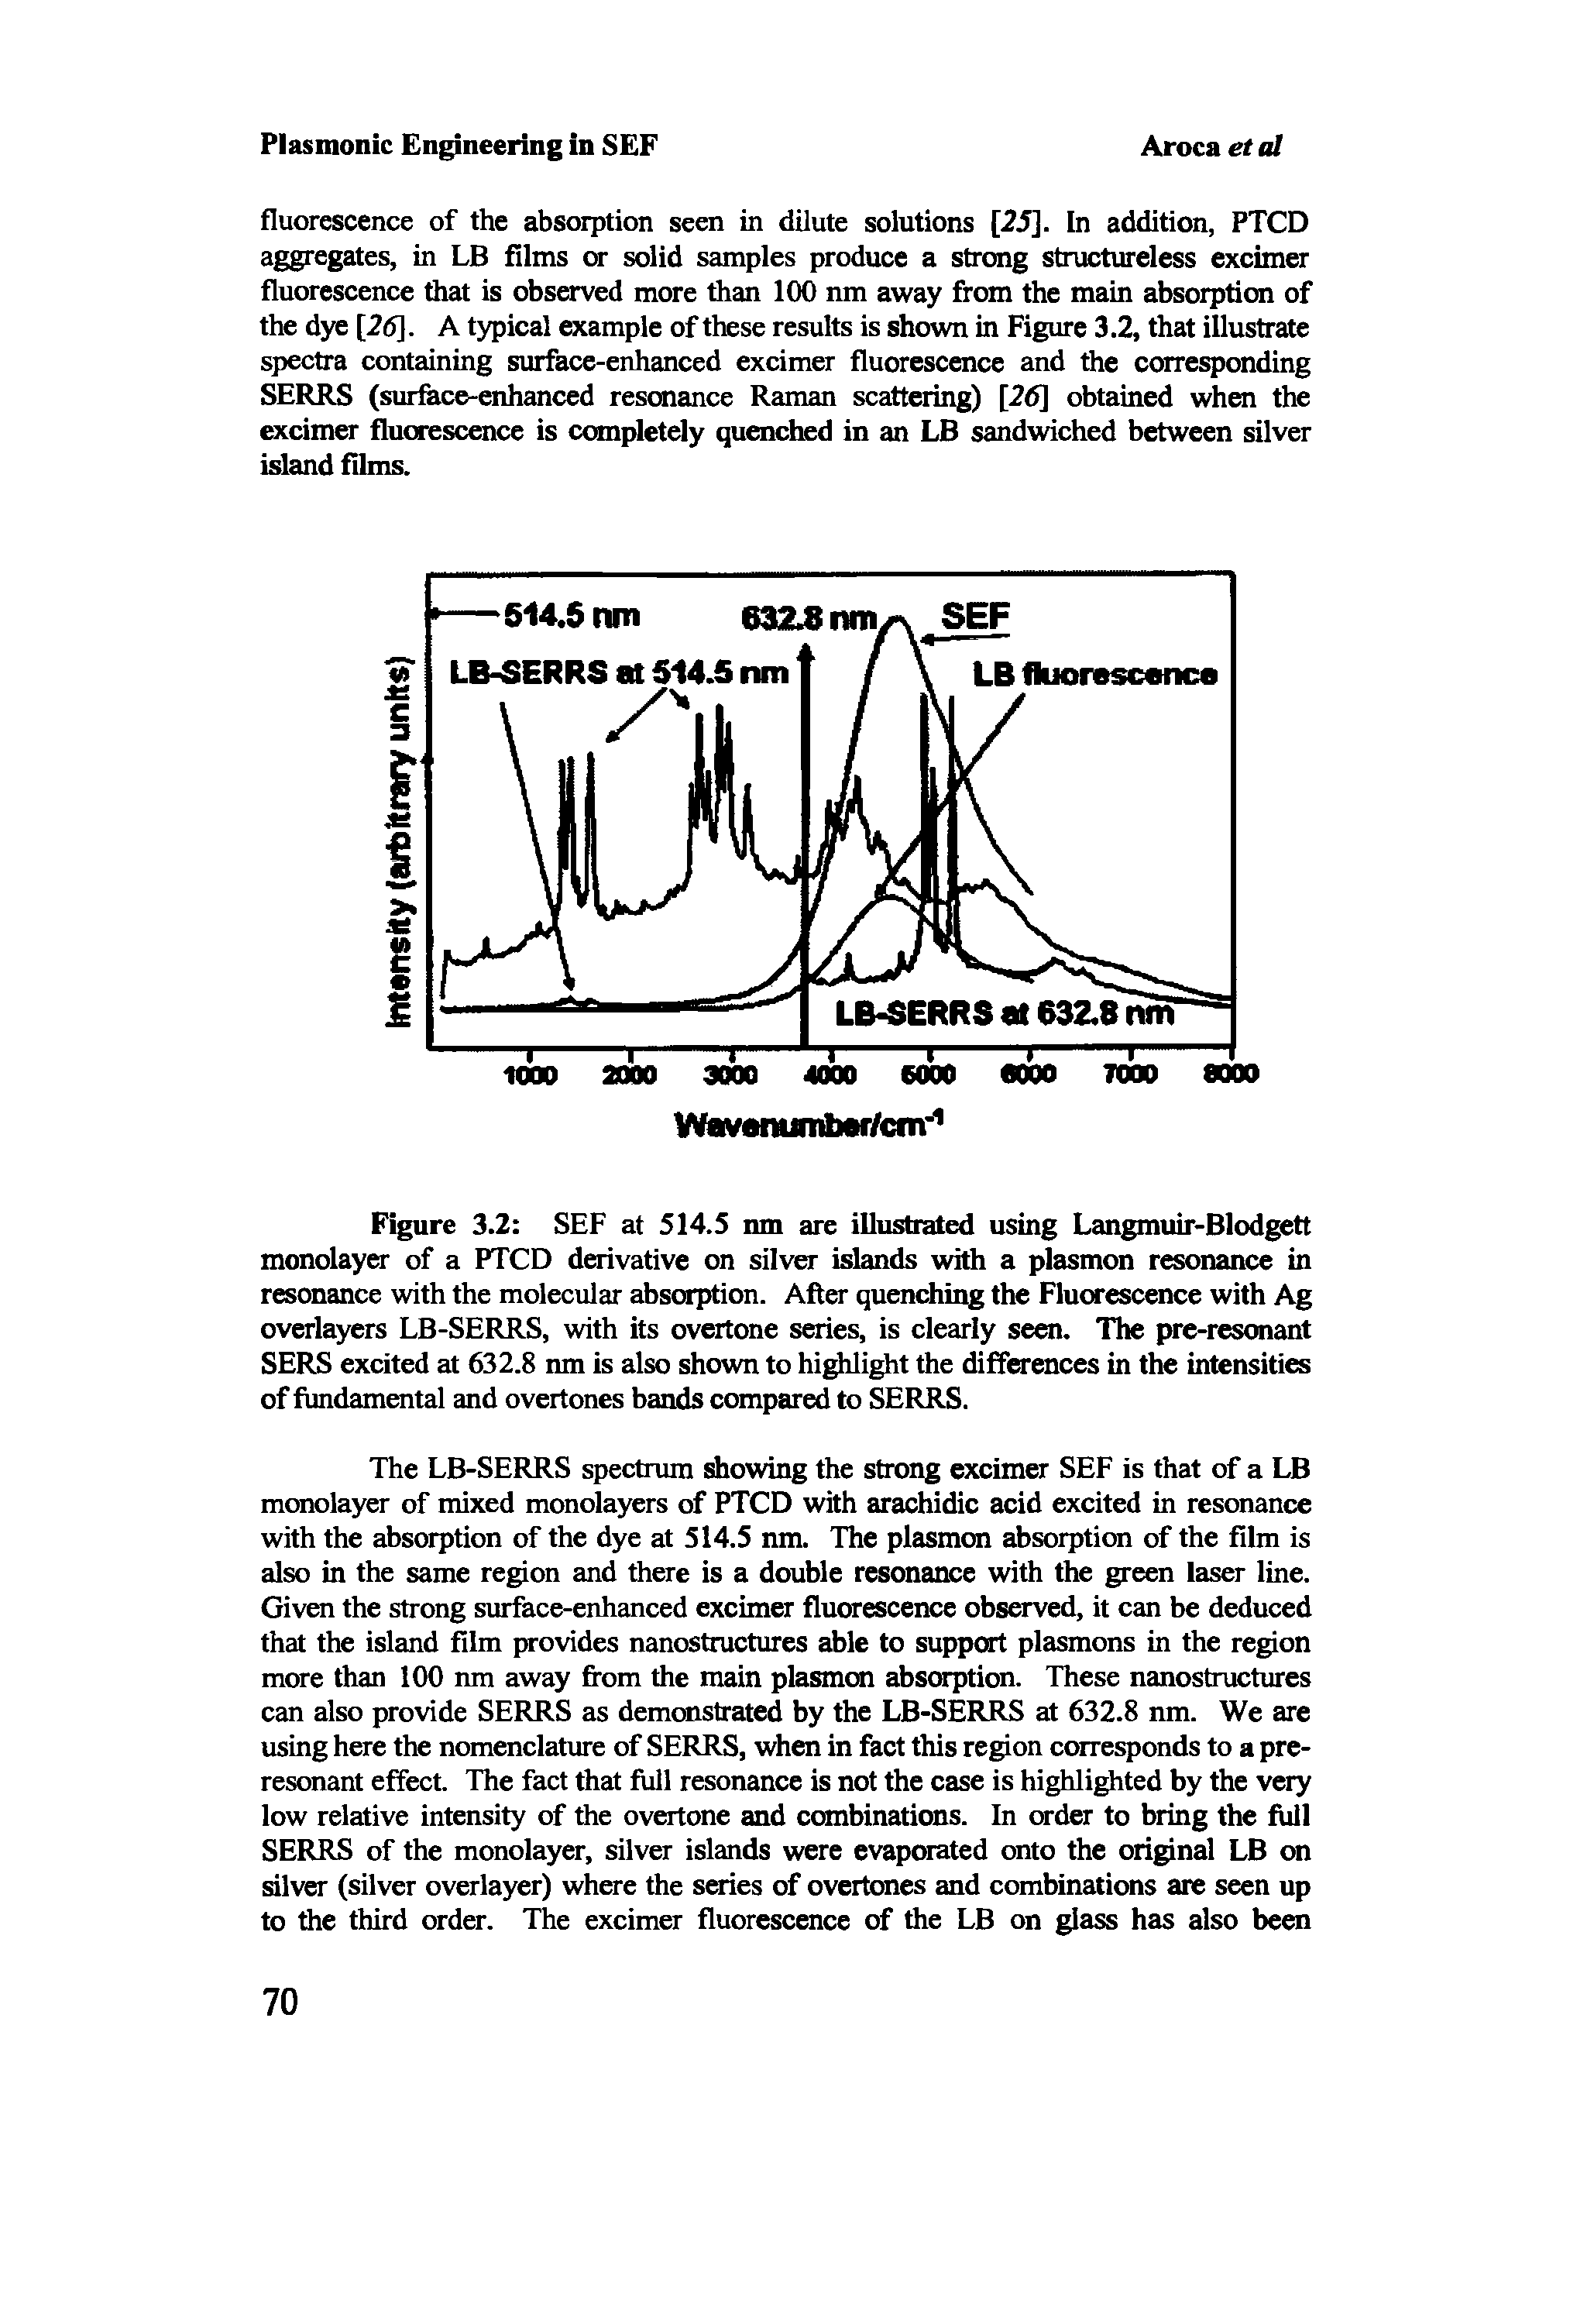 Figure 3.2 SEF at 514.S nm are illustrated using Langmuir-Blodgett monolayer of a PTCD derivative on silver islands with a plasmon resonance in resonance with the molecular absorption. After quenching the Fluorescence with Ag overlayers LB-SERRS, with its overtone series, is clearly seen. The pre-resonant SERS excited at 632.8 nm is also shown to highlight the differences in the intensities of fundamental and overtones bands compared to SERRS.